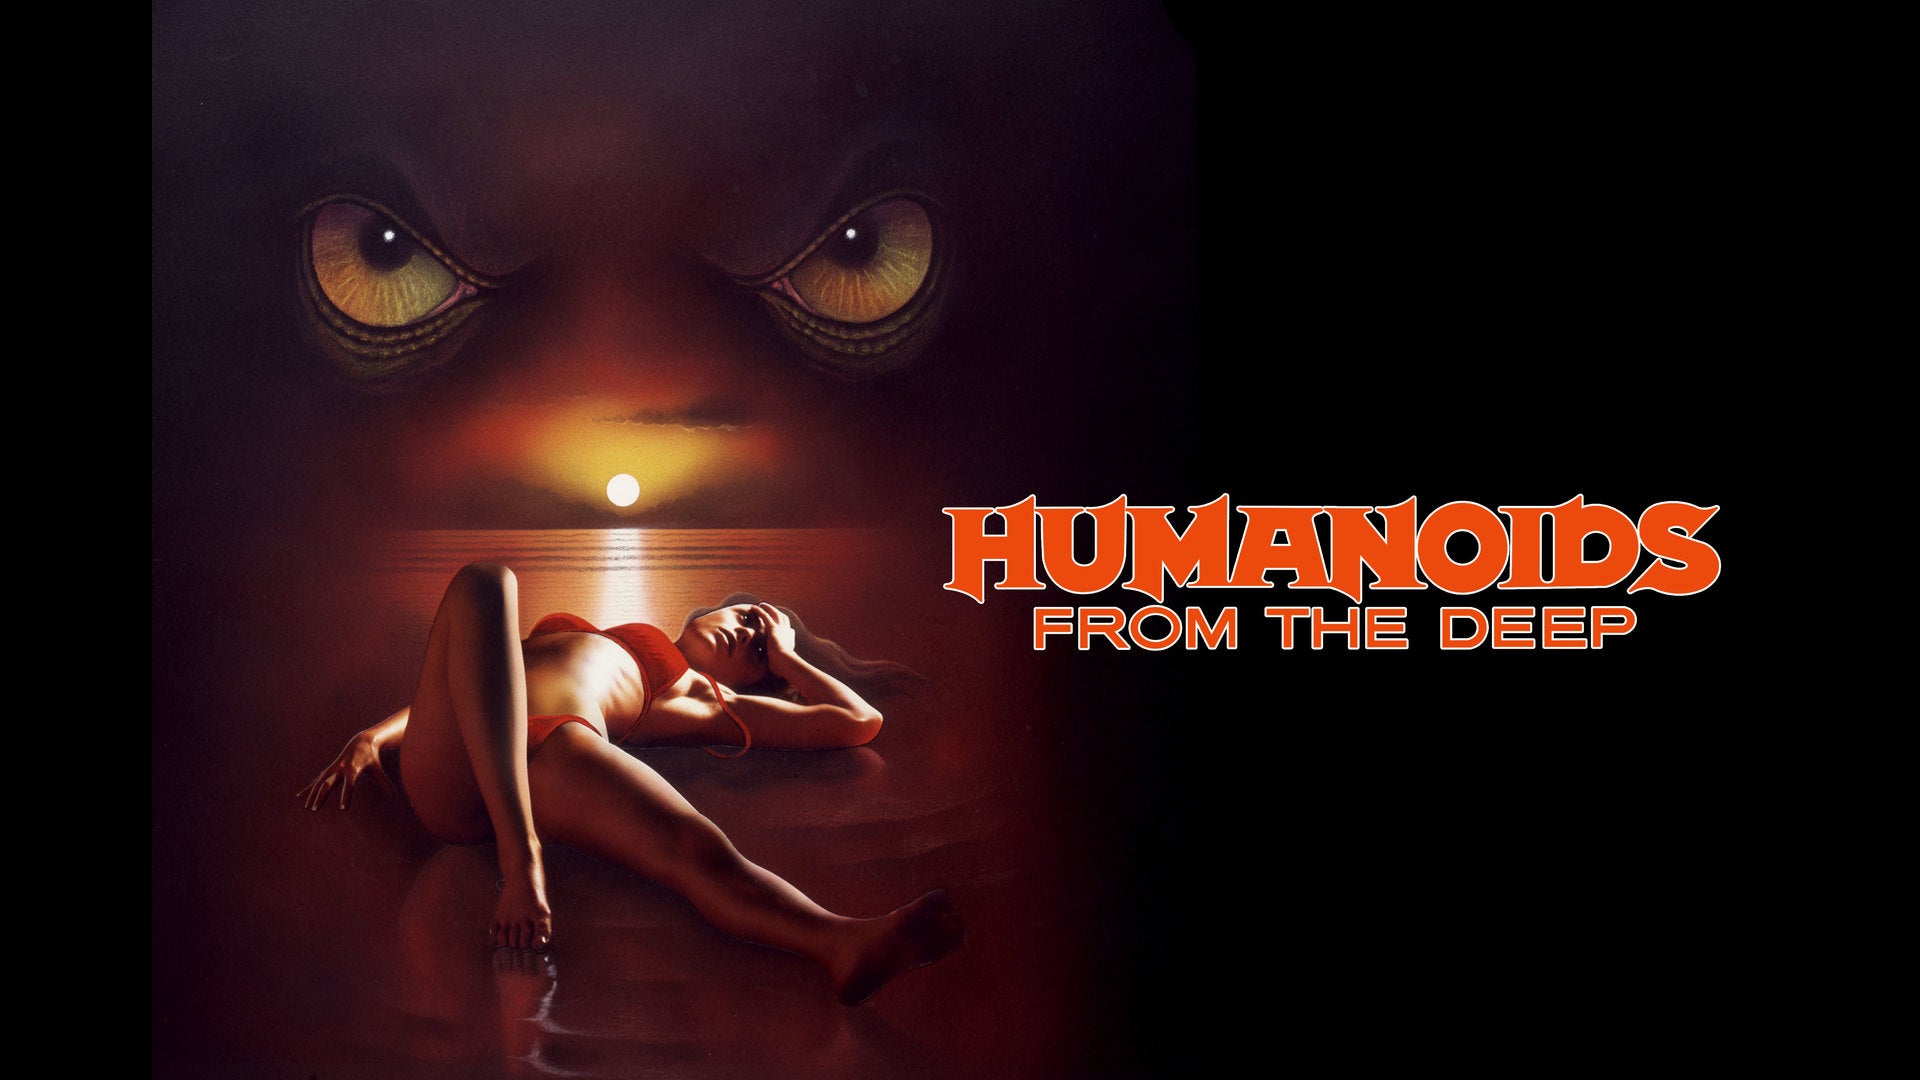 Humanoids From The Deep - Limited Edition Collectible SteelBook